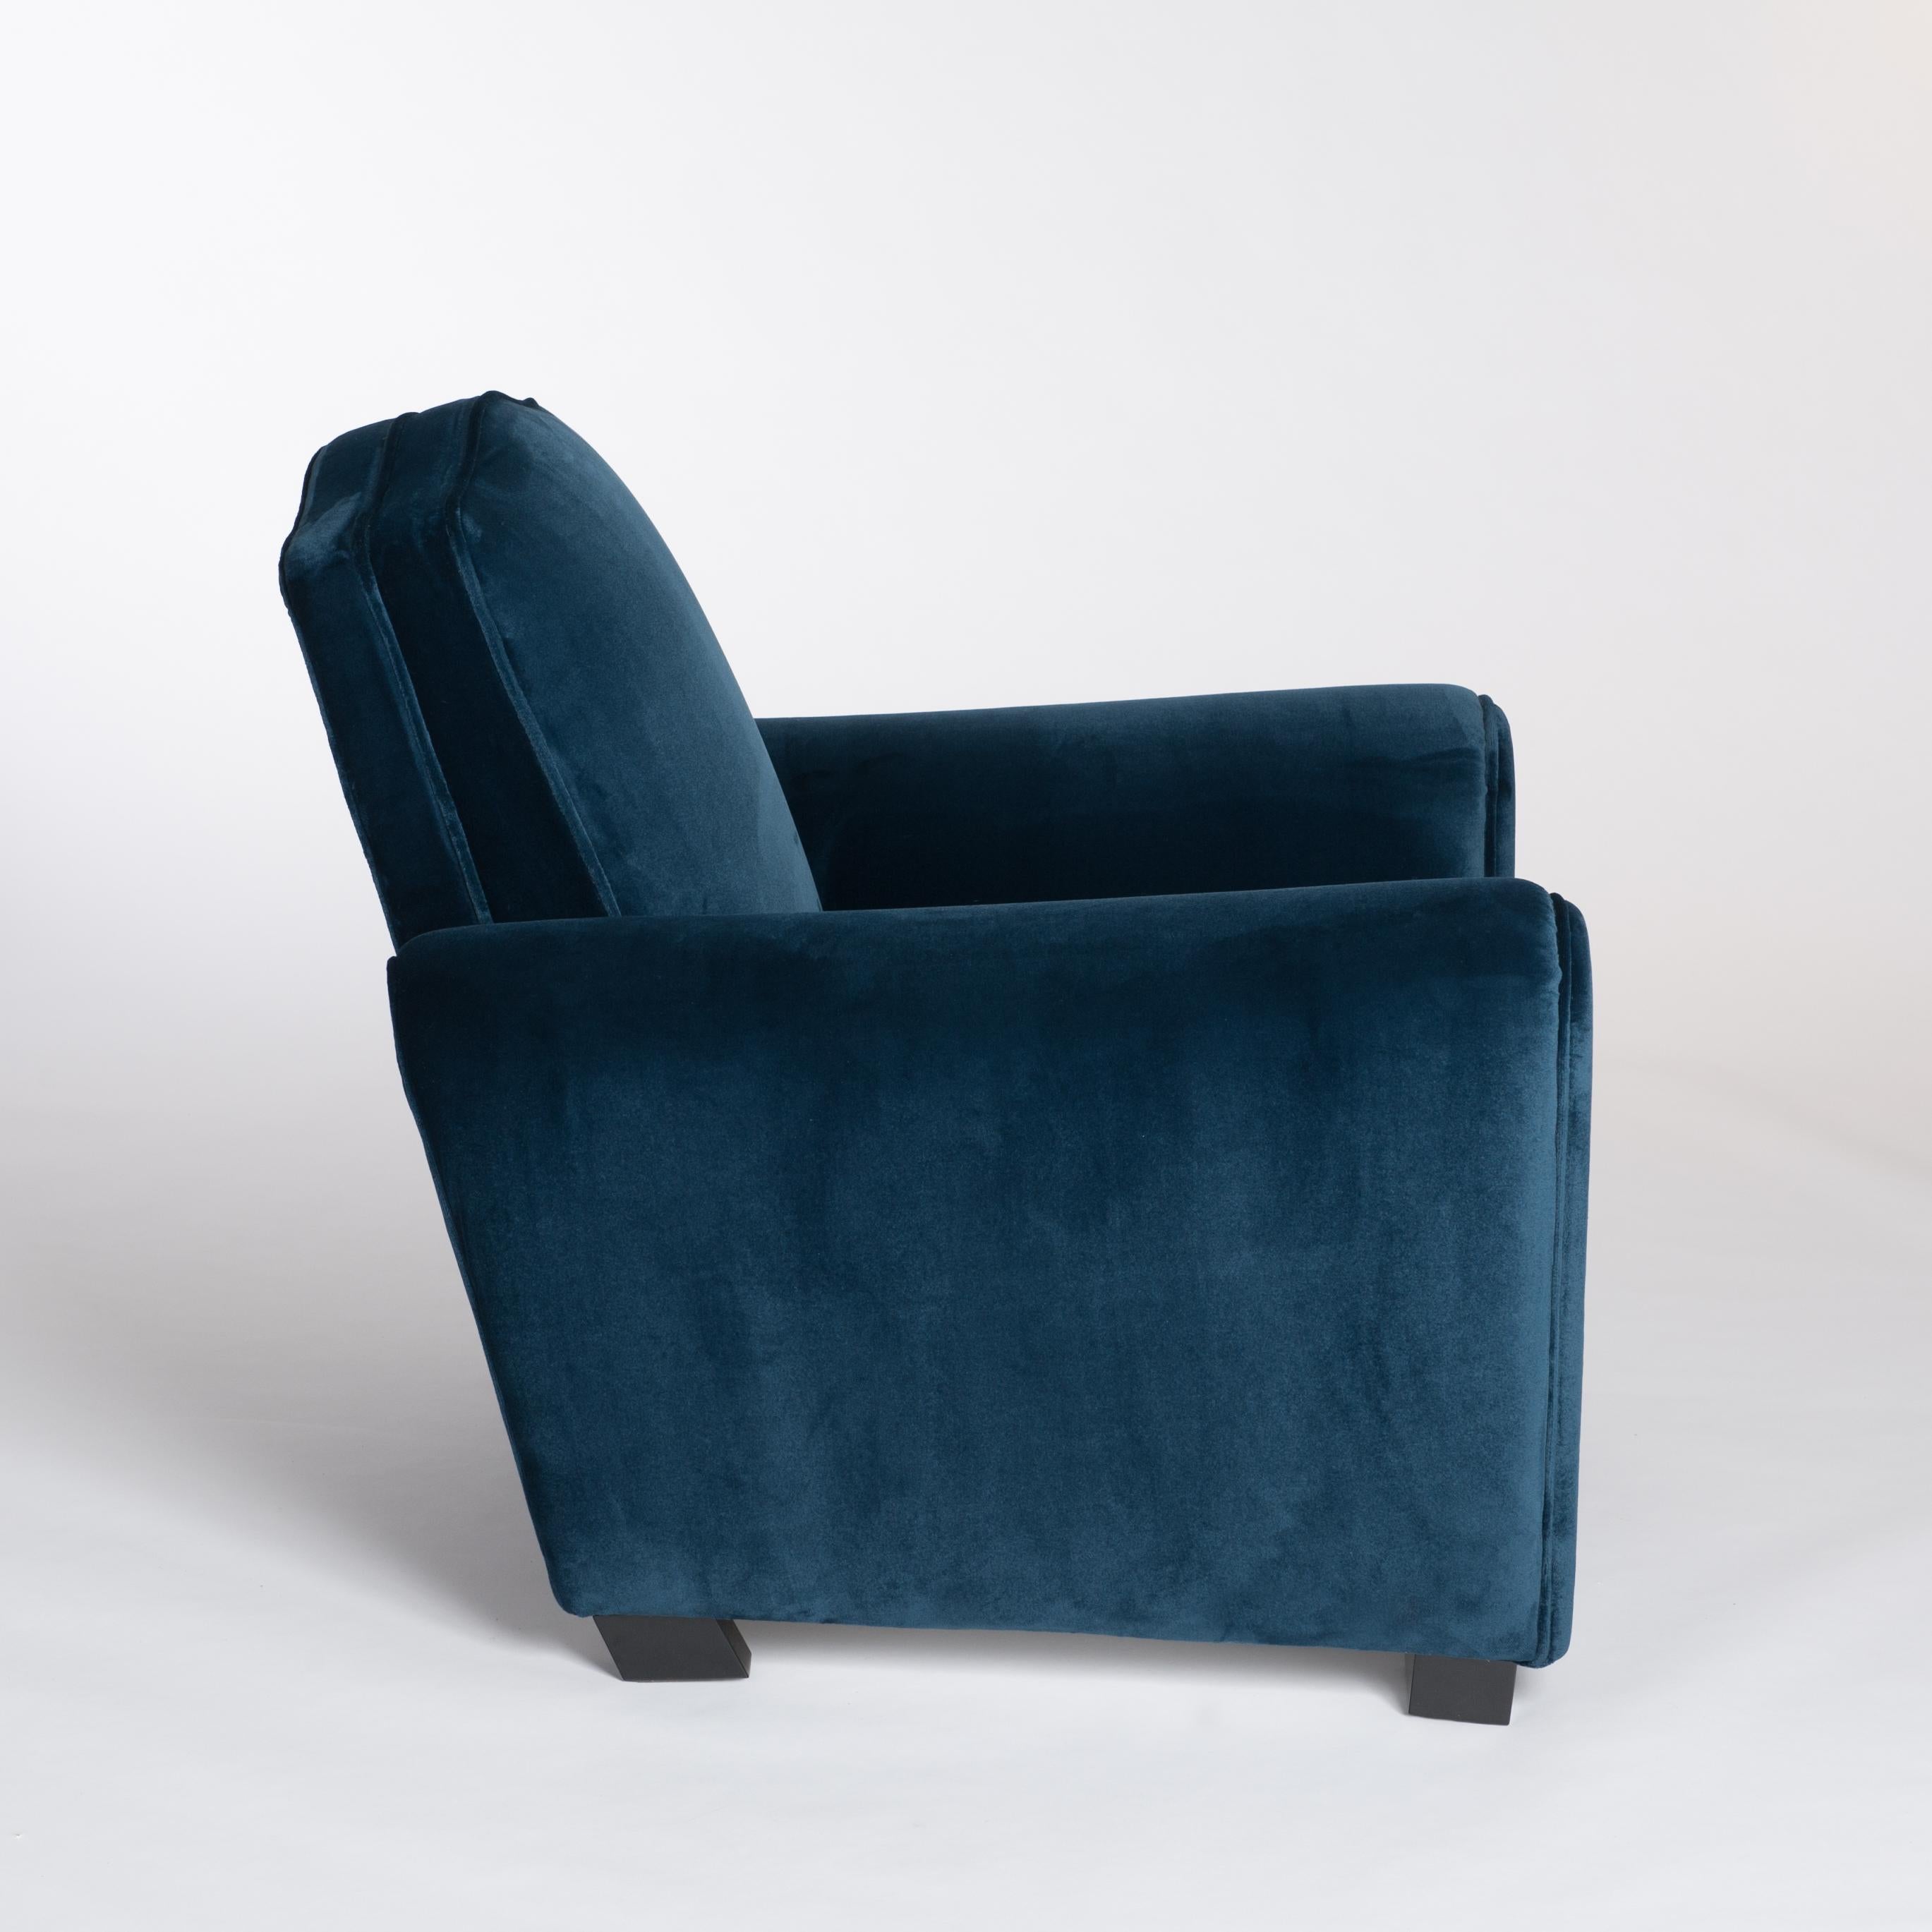 Early 20th Century Pair of French Art Deco Armchairs or Club Chairs in Turquois Velvet from Rubelli